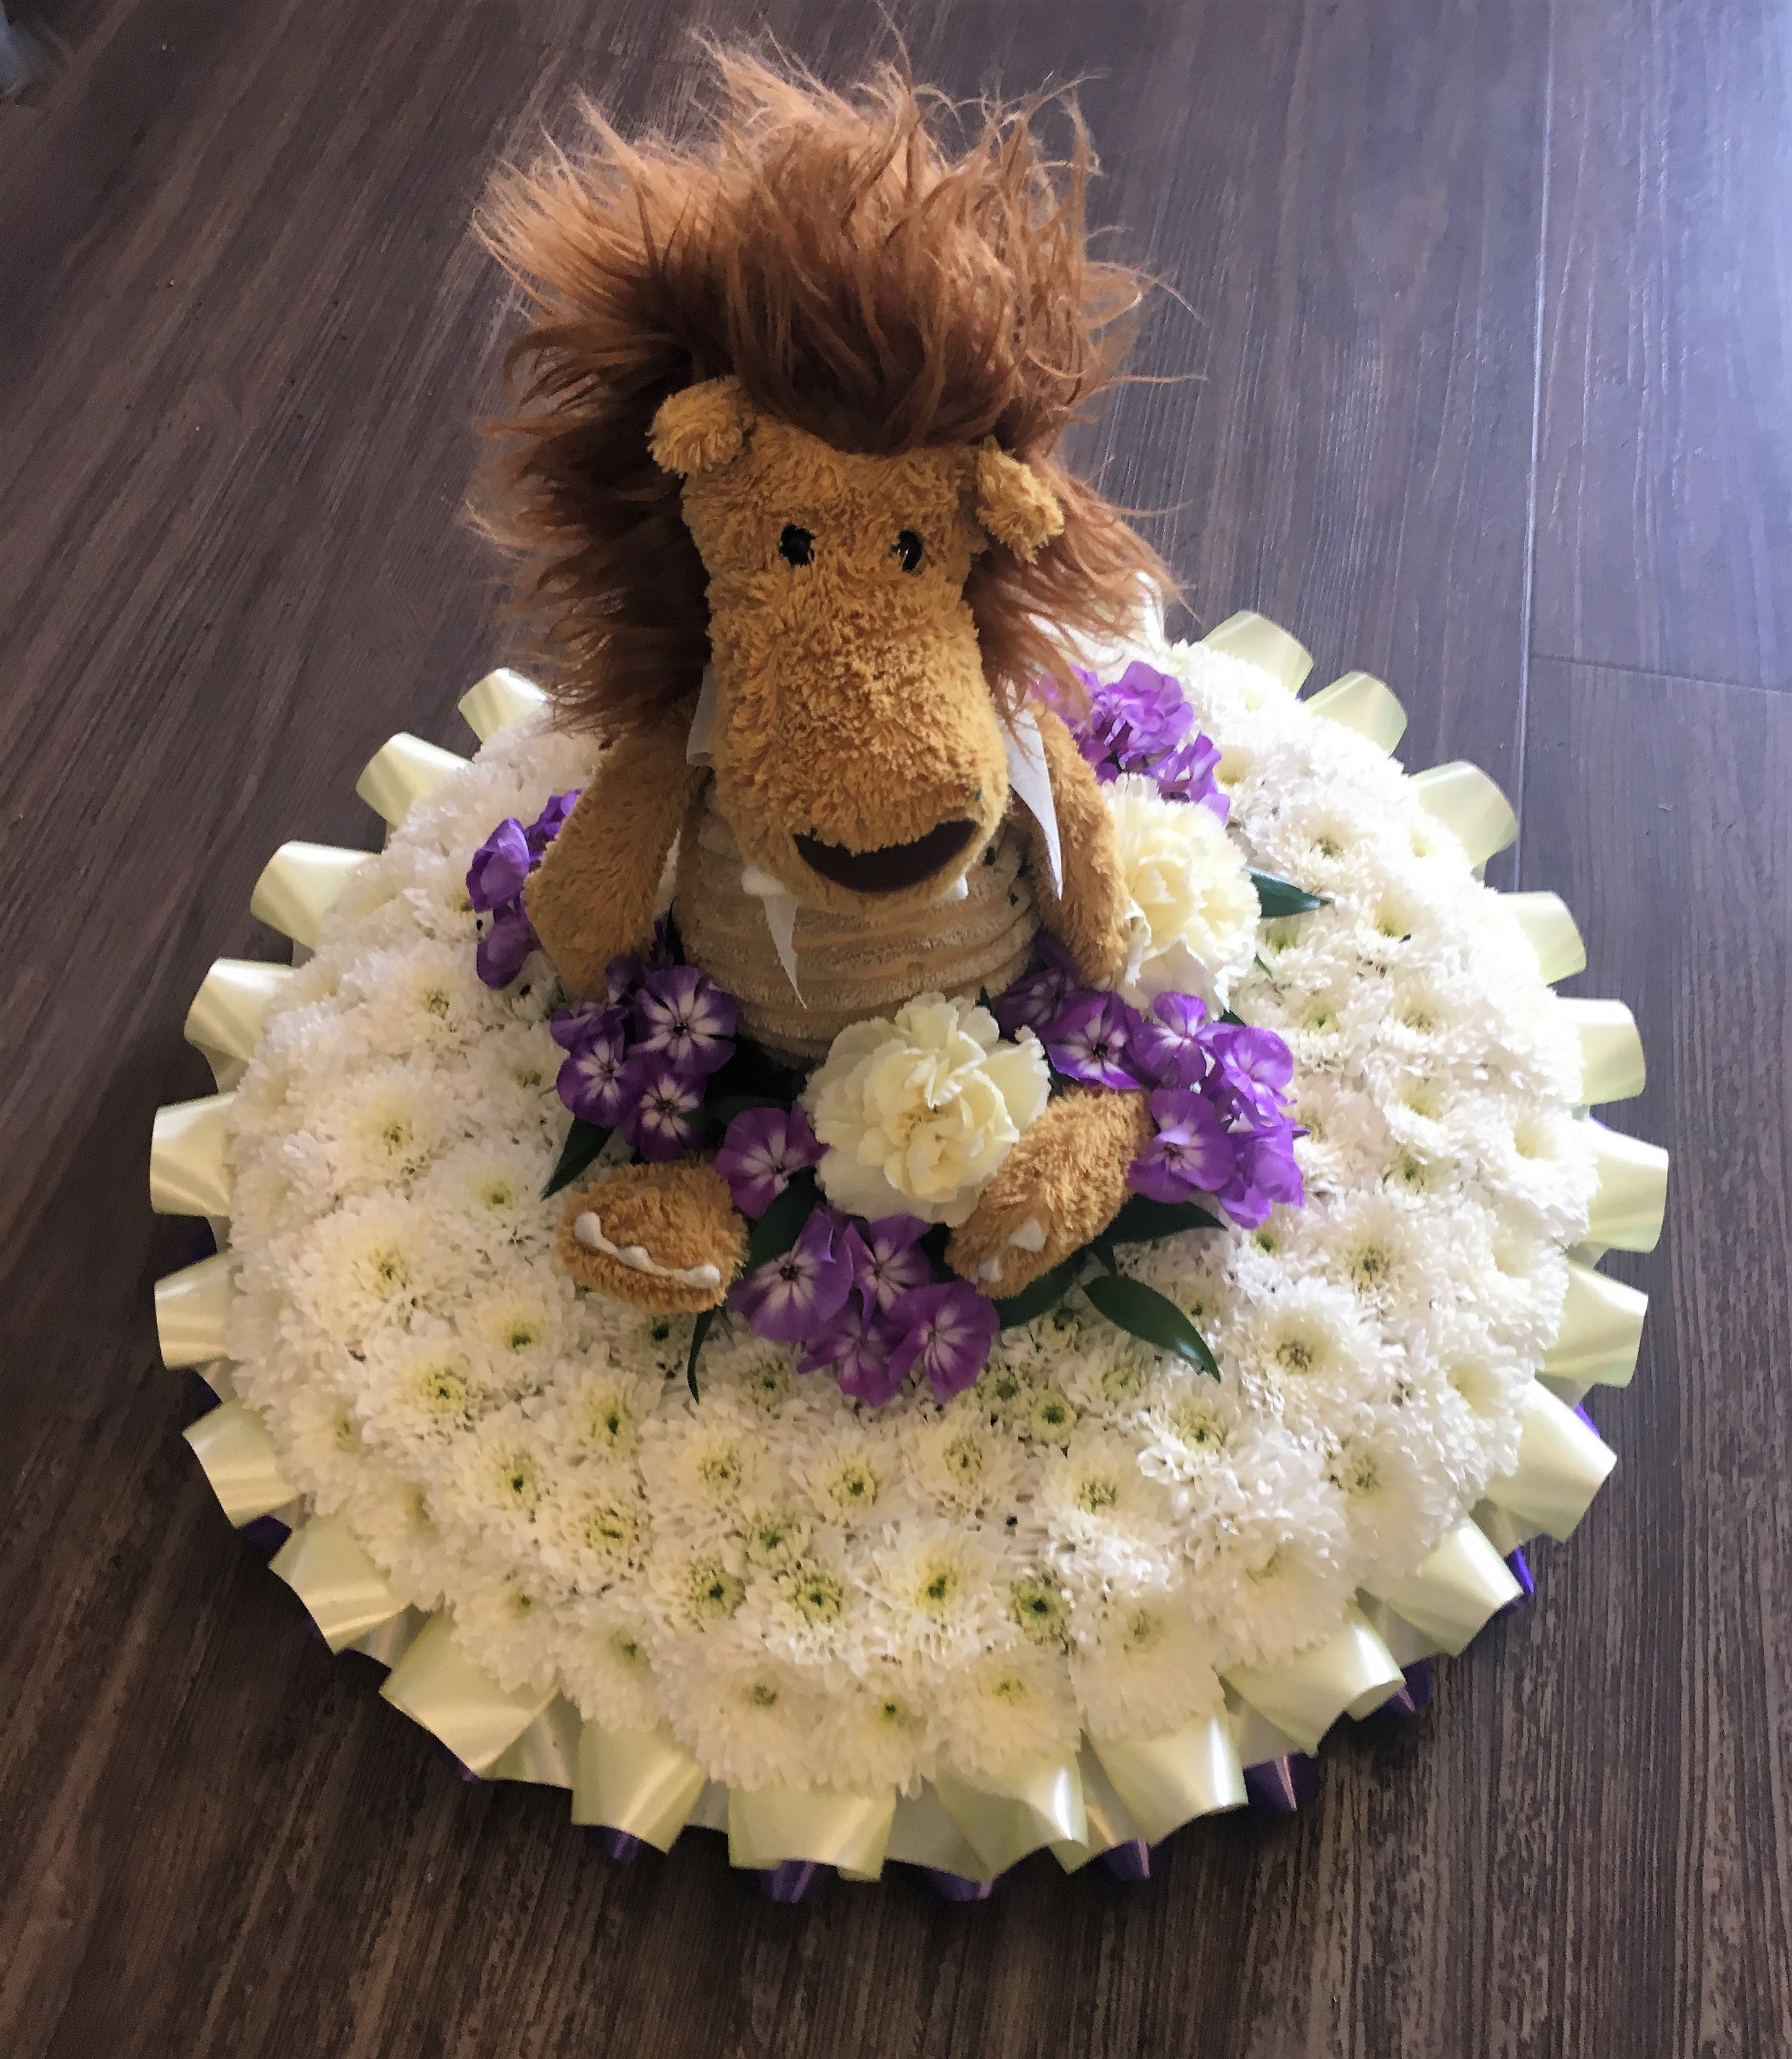 Personal Teddy Bear Touch Funeral Tribute FRESH FUNERAL FLOWERS DELIVERY FLORIST IN STUDLEY REDDITCH ALCESTER